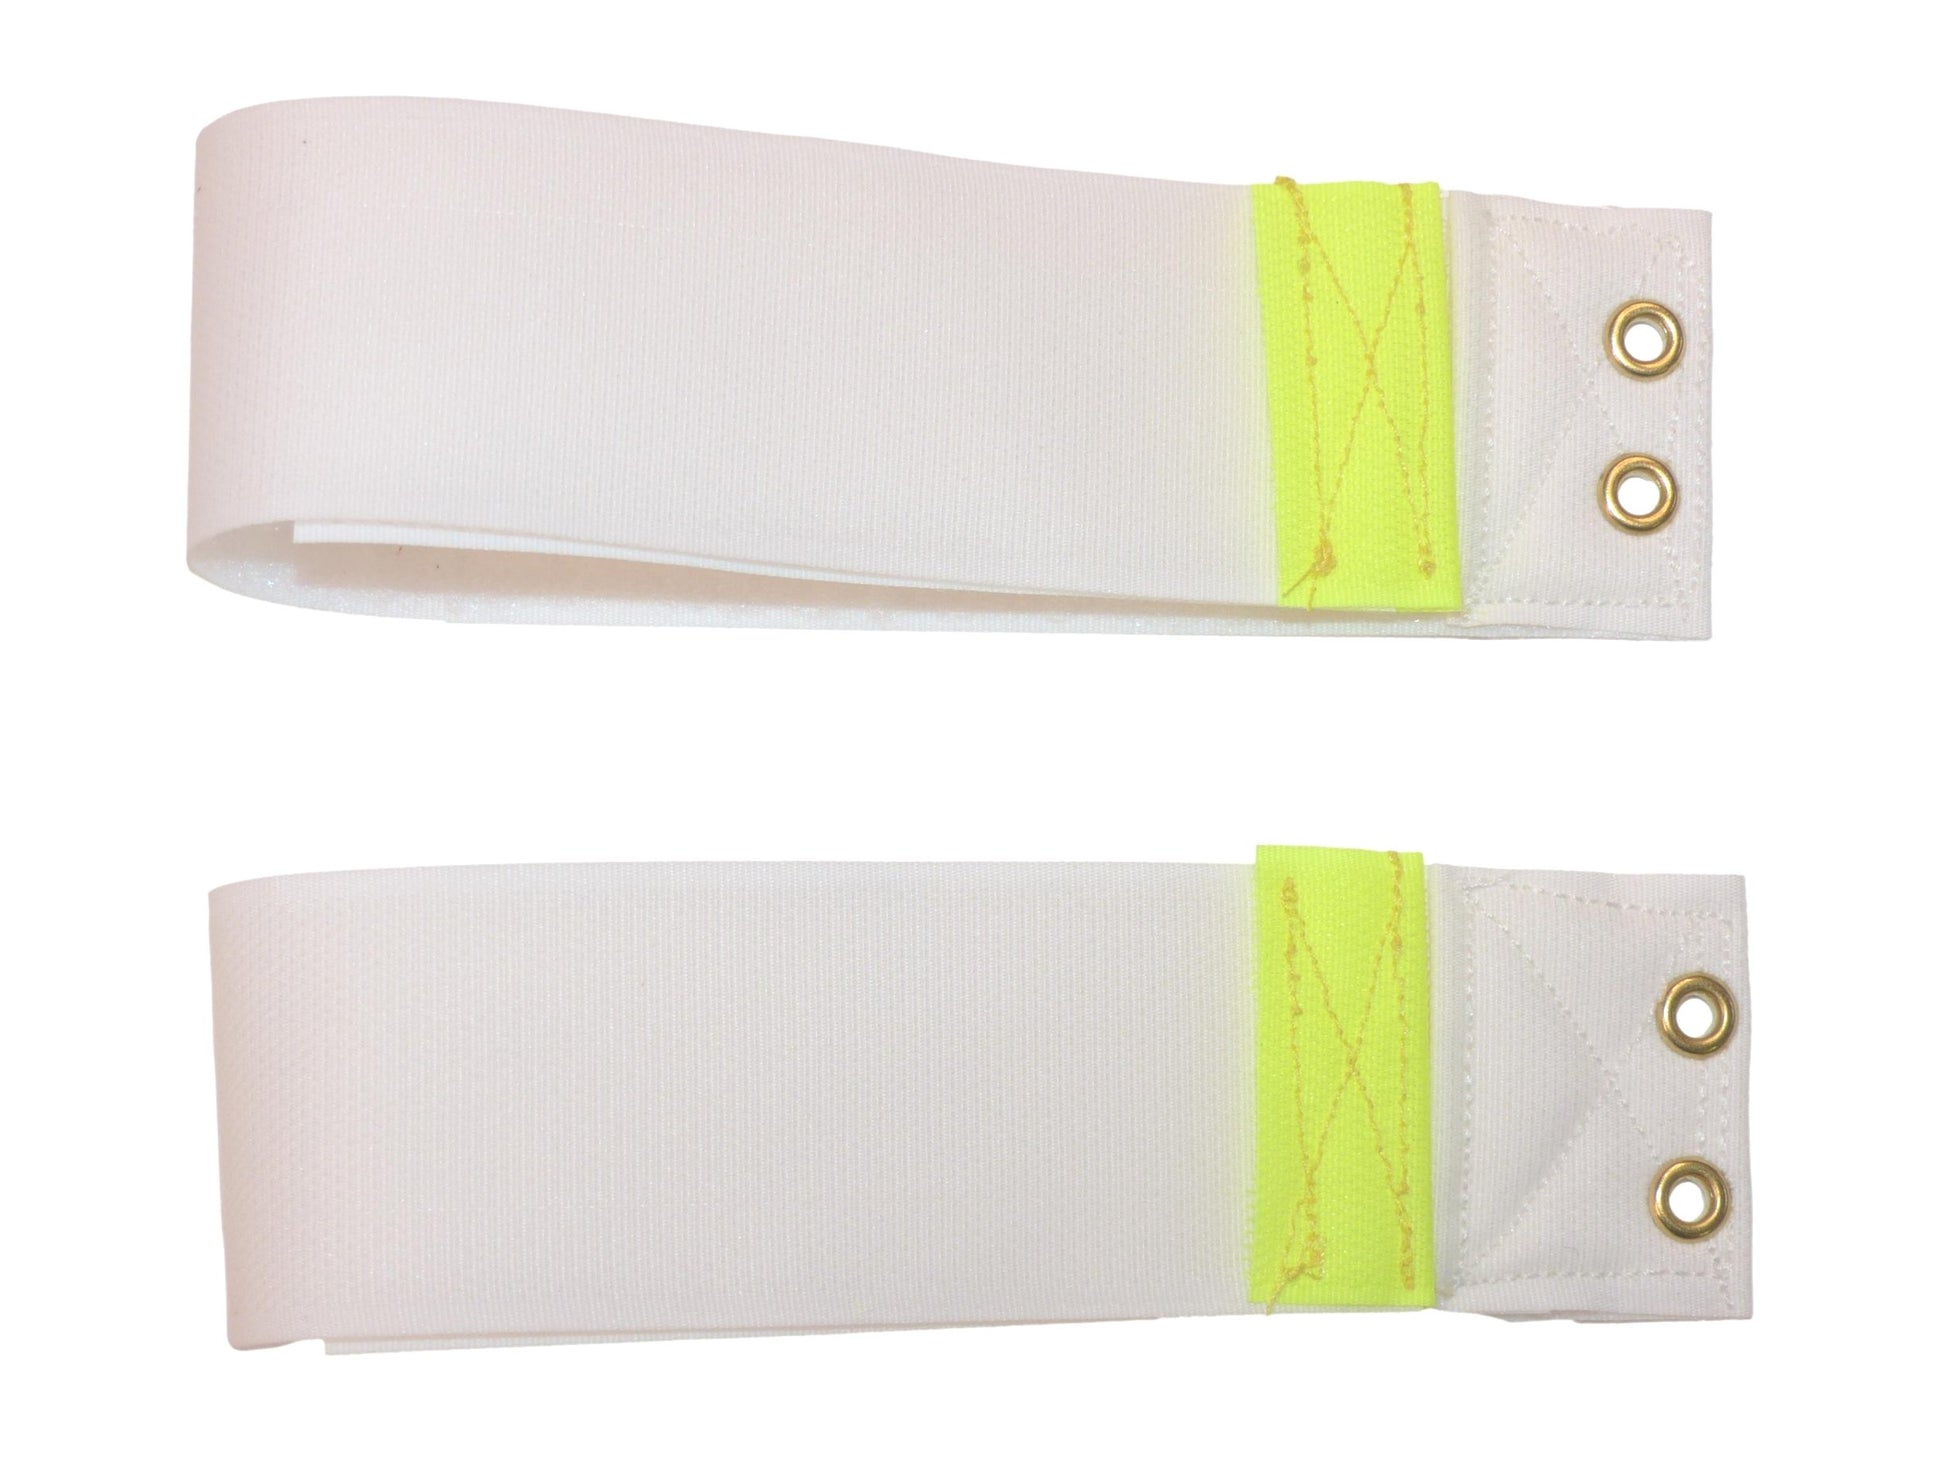 Premium 50mm Hook & Loop Tidy & Hang Strap with Eyelet (Pack of Two) in white